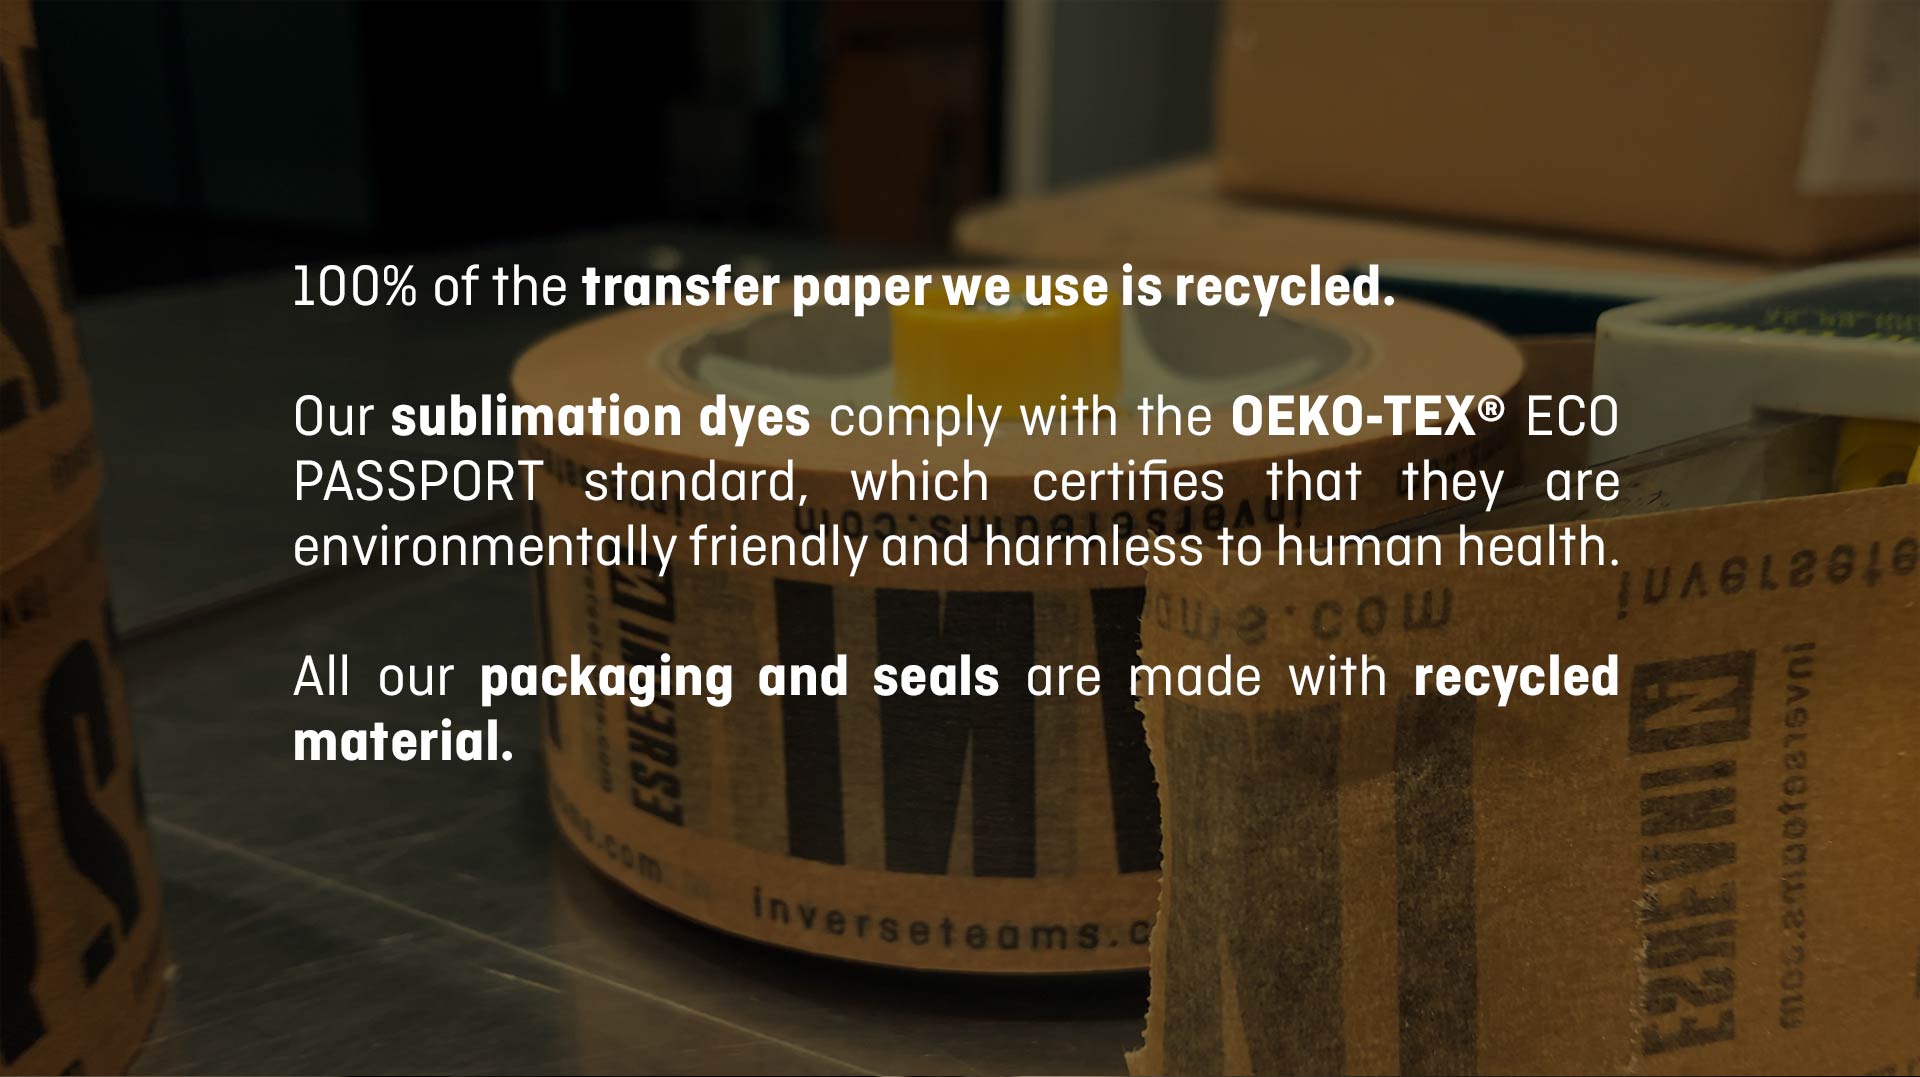 Transfer paper we use is recycled. Packaging and seals are made with recycled material.